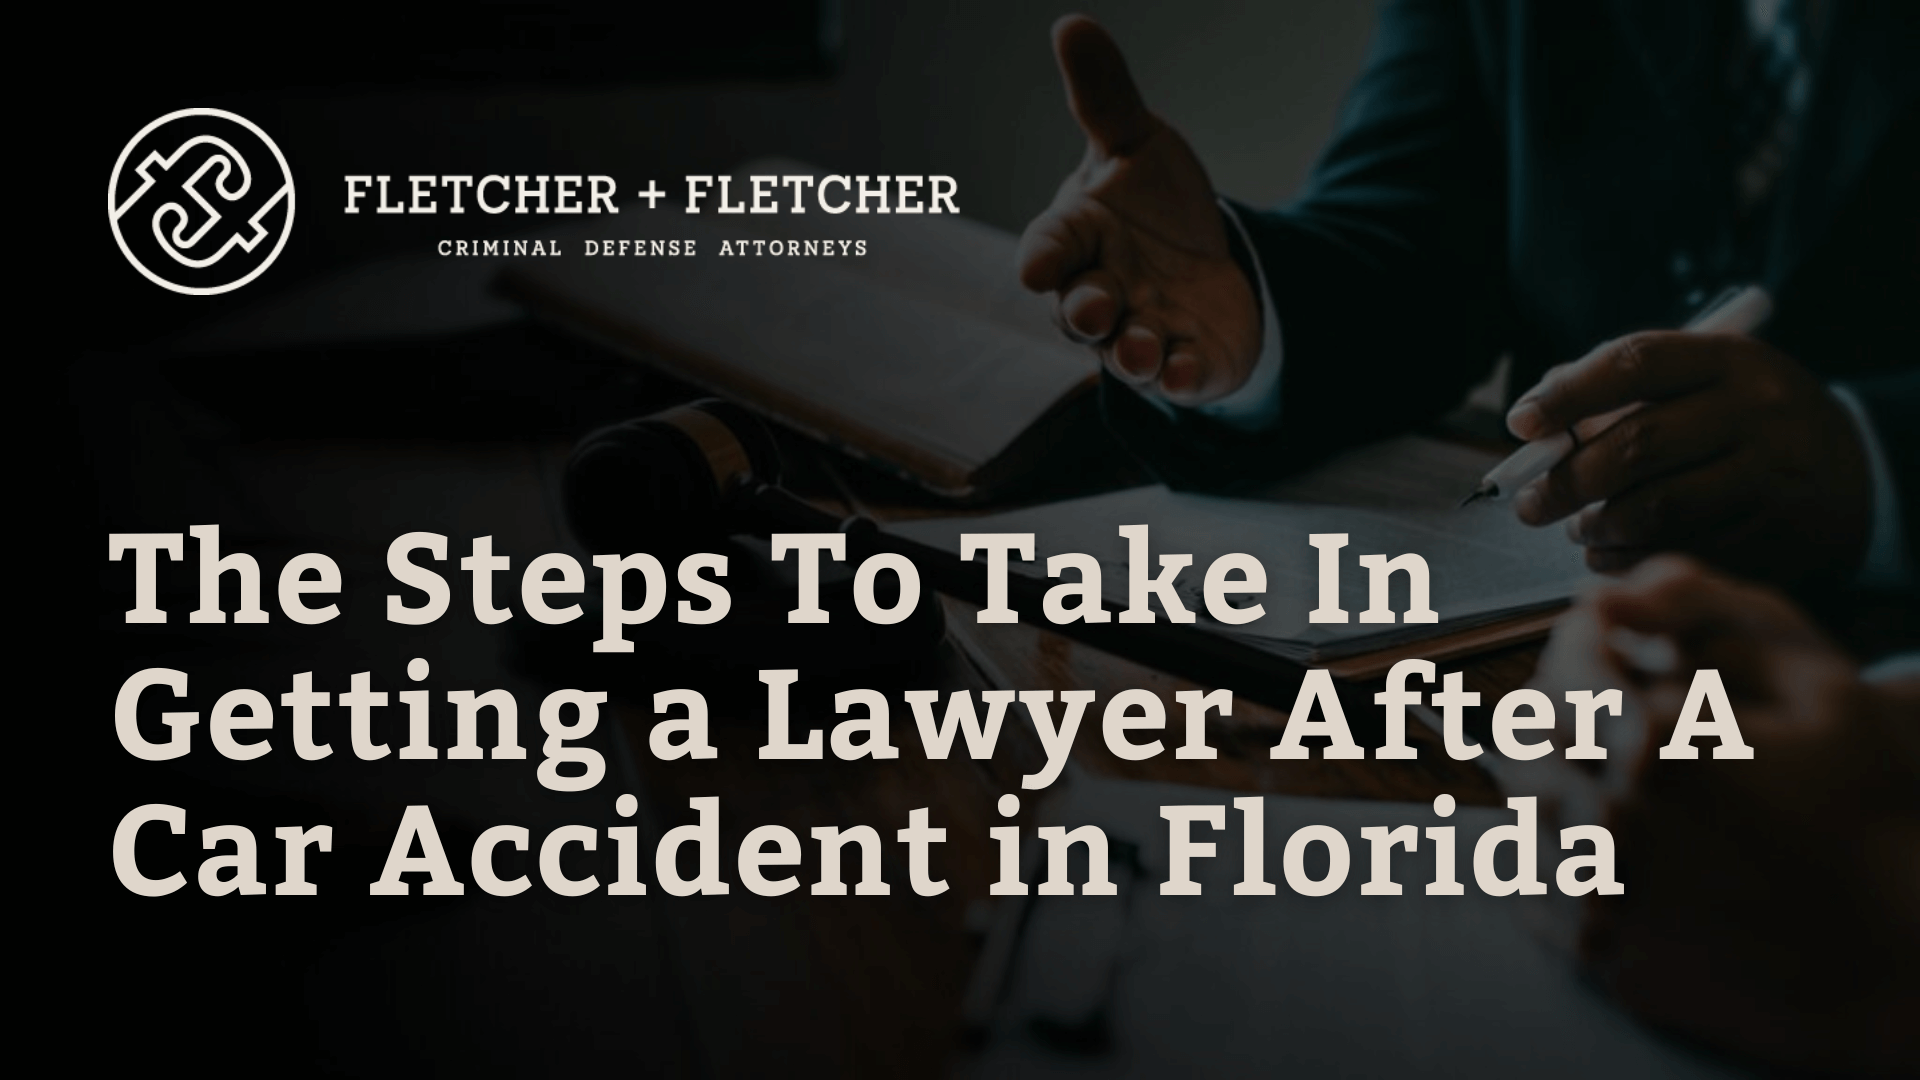 steps to getting a lawer after a car accident in florida - fletcher and fletcher St. Petersburg